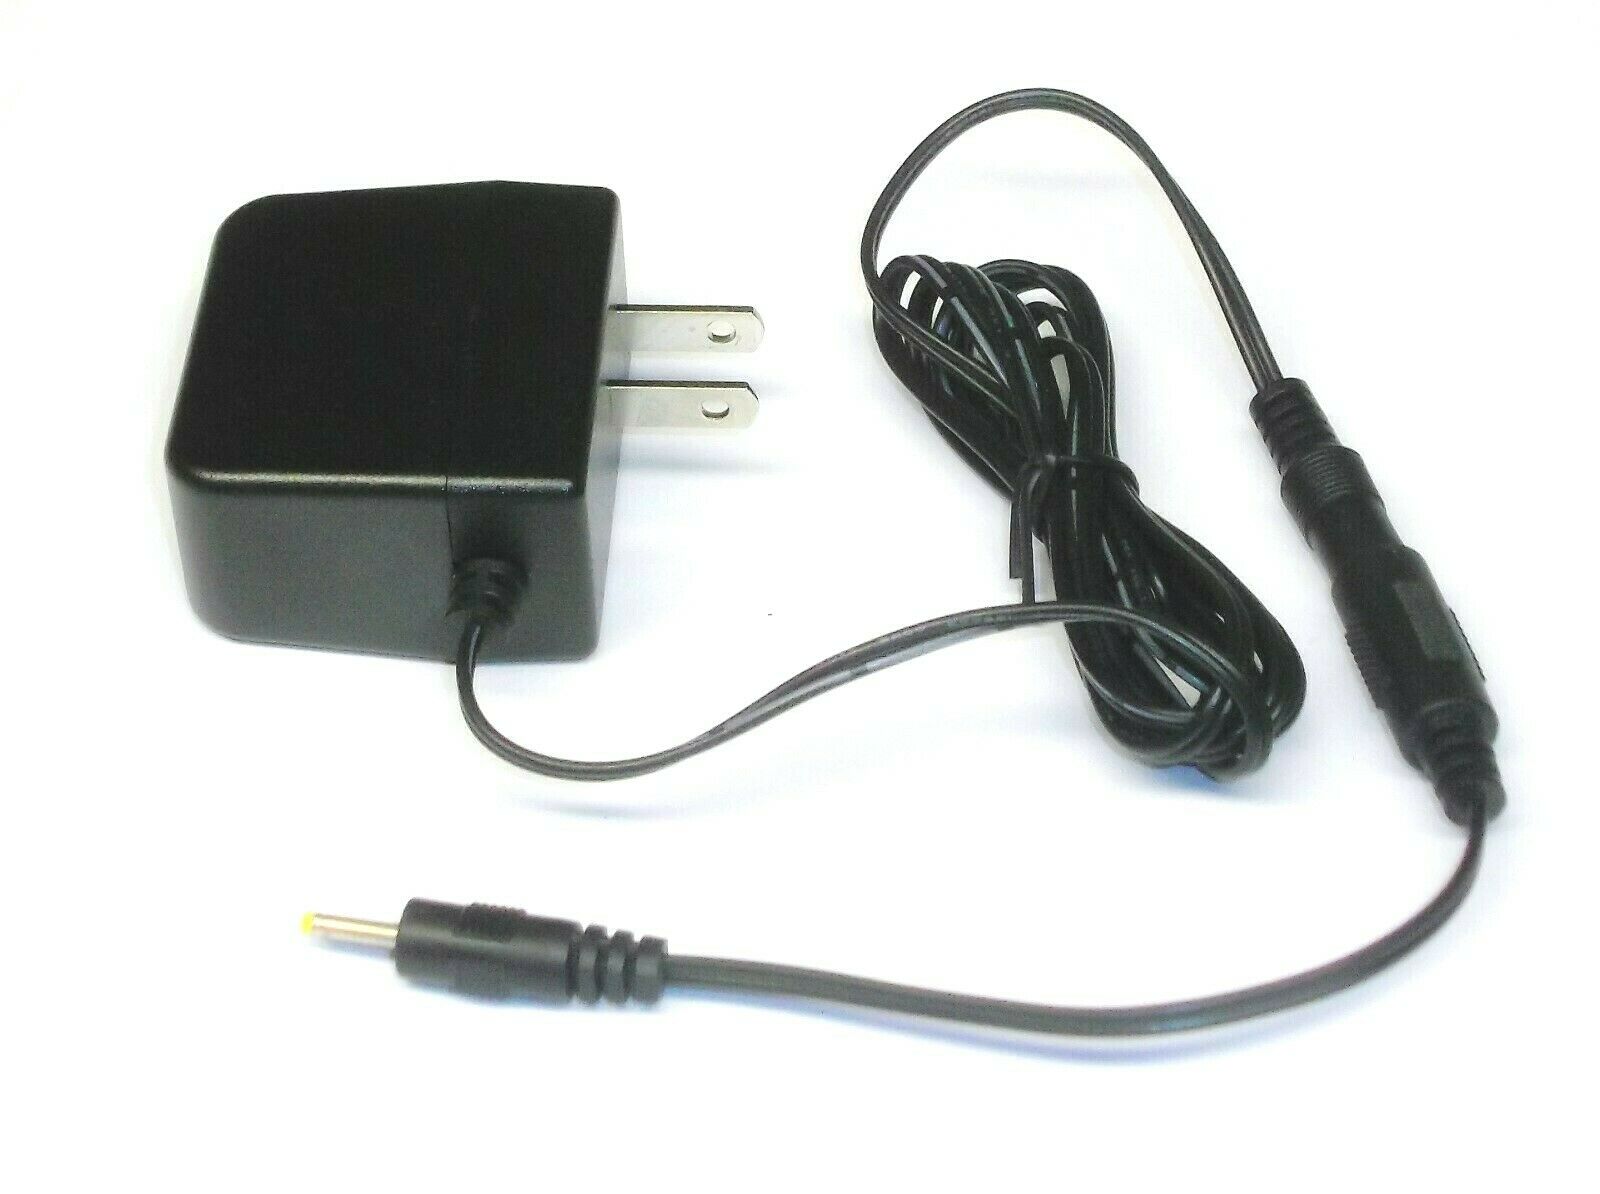 8.4V 2A AC DC Adapter Charger For Sony PCS-AC08 PCS-AC08/1 Power Supply Cord Construction: 100% Brand New! Generic Repl - Click Image to Close